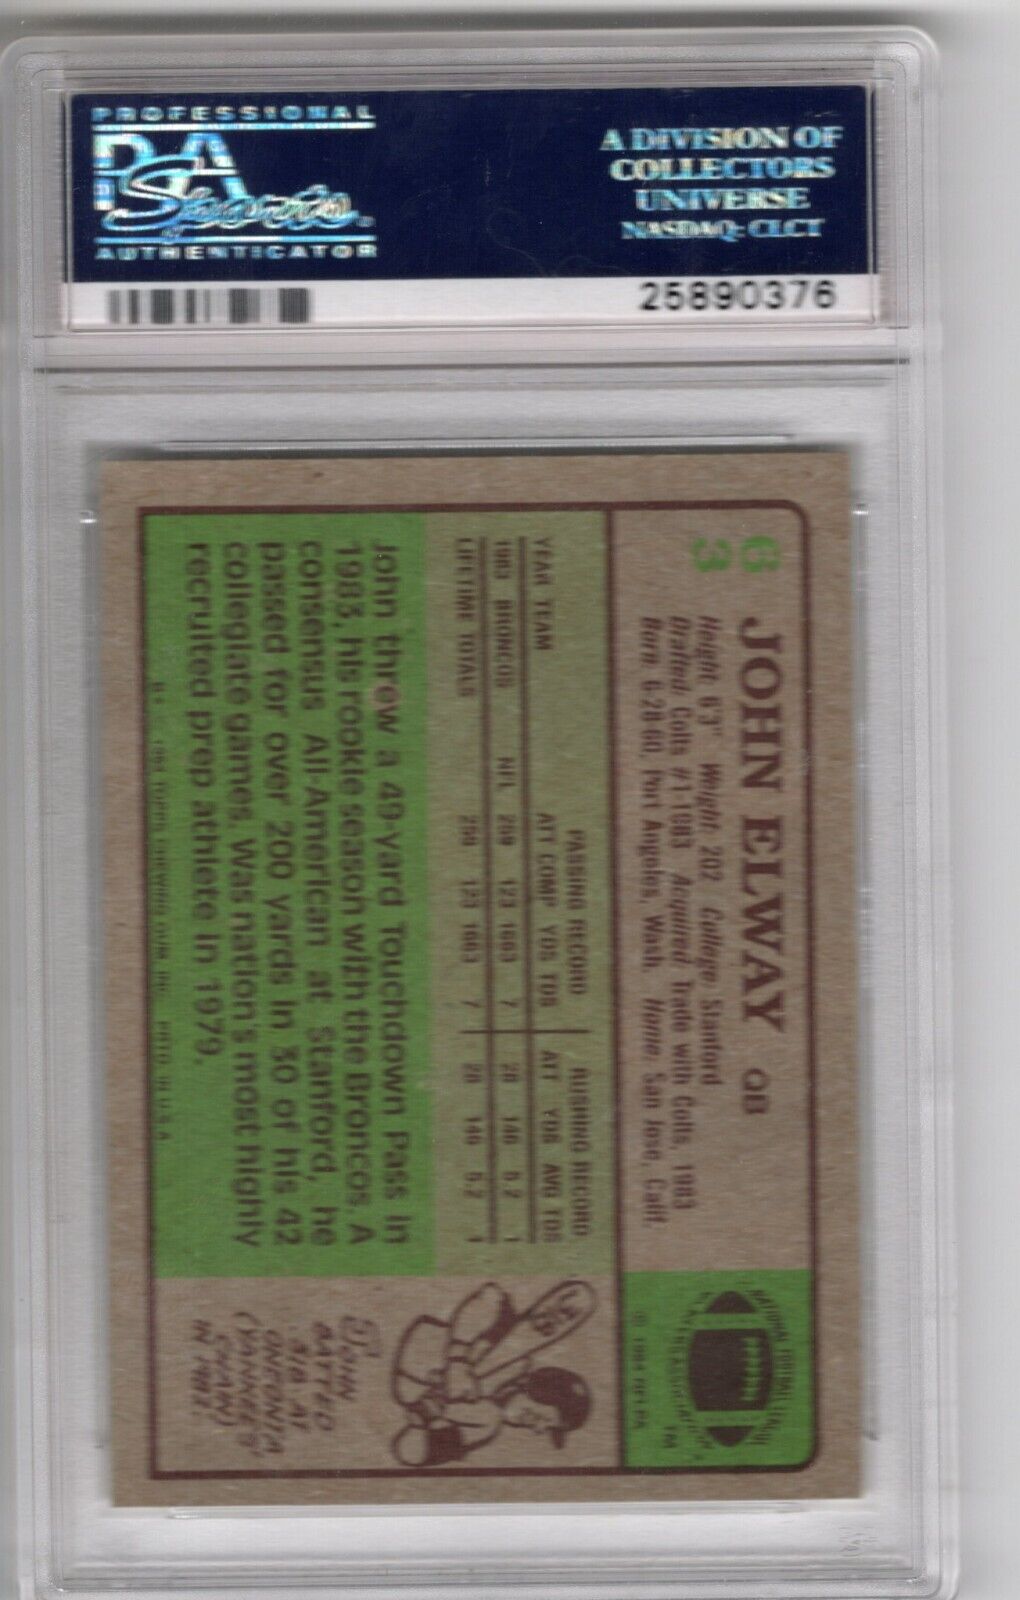 1984 Topps Football #63 John Elway Rookie Card RC PSA 8 - 643-collectibles